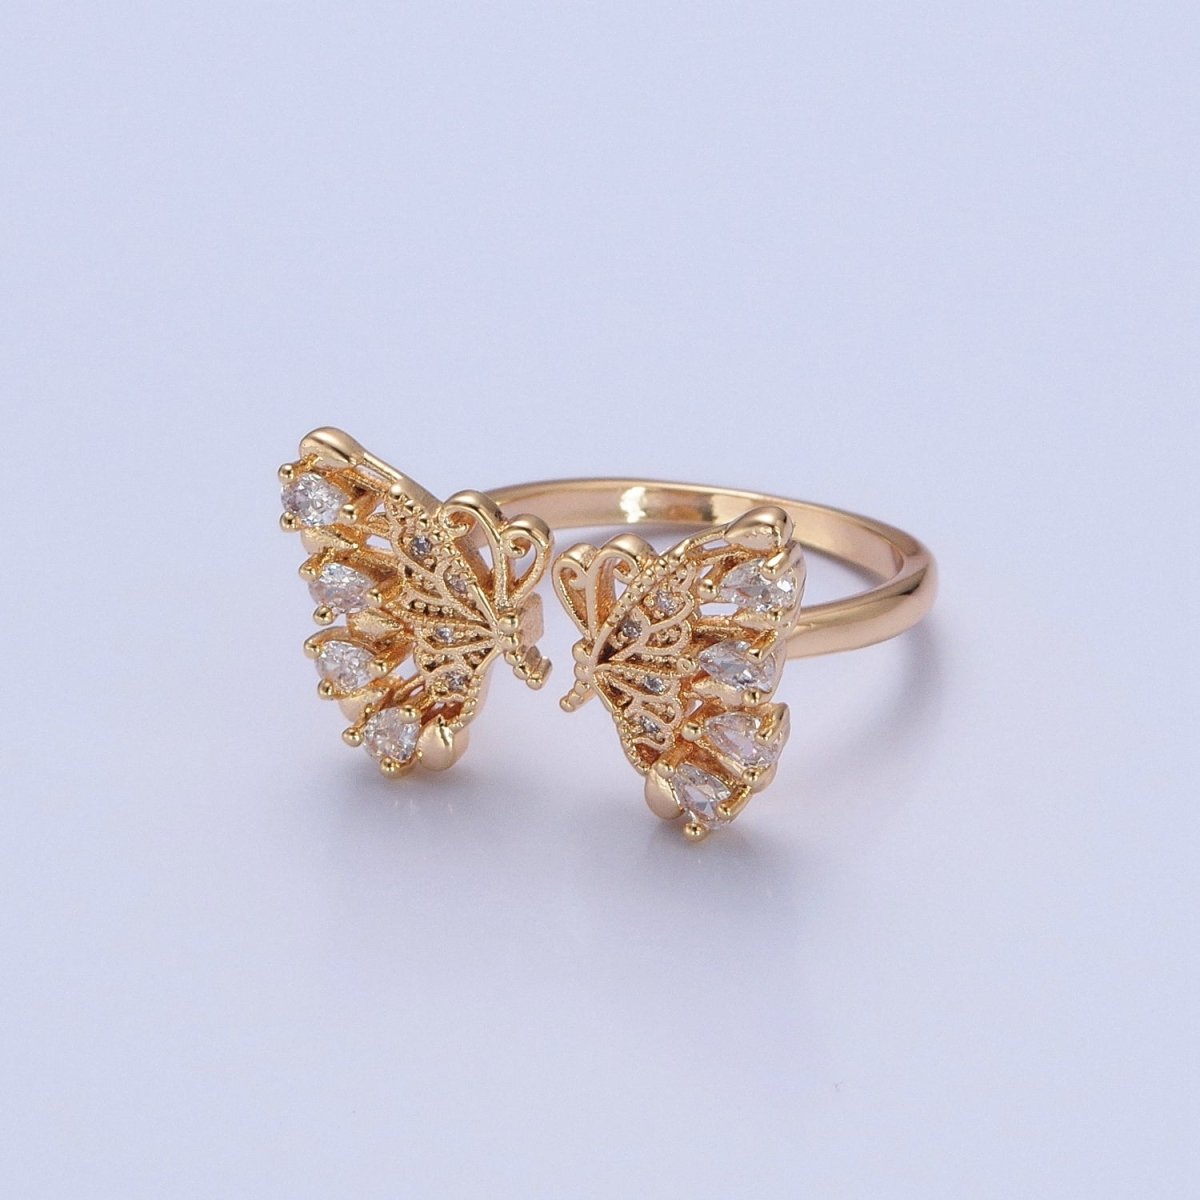 18k Gold Filled Dainty Butterfly Ring, Gold Pave Butterfly Ring, Delicate Butterfly Open Ring Adjustable Ring Big Butterfly Ring O-737 - DLUXCA